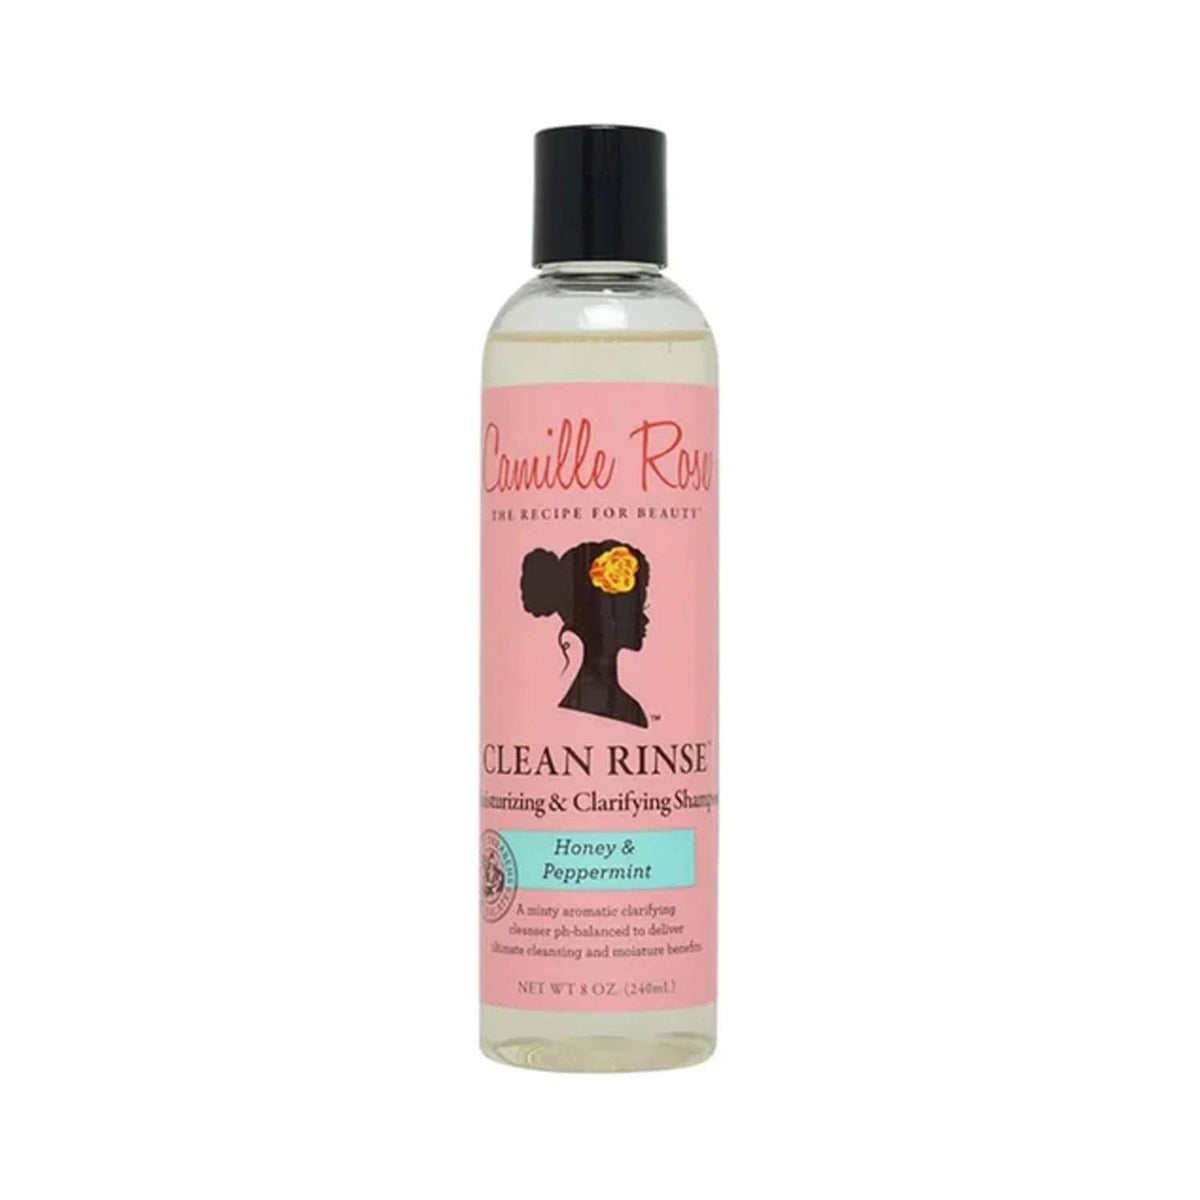 CAMILLE ROSE CLEAN RINSE    8OZ